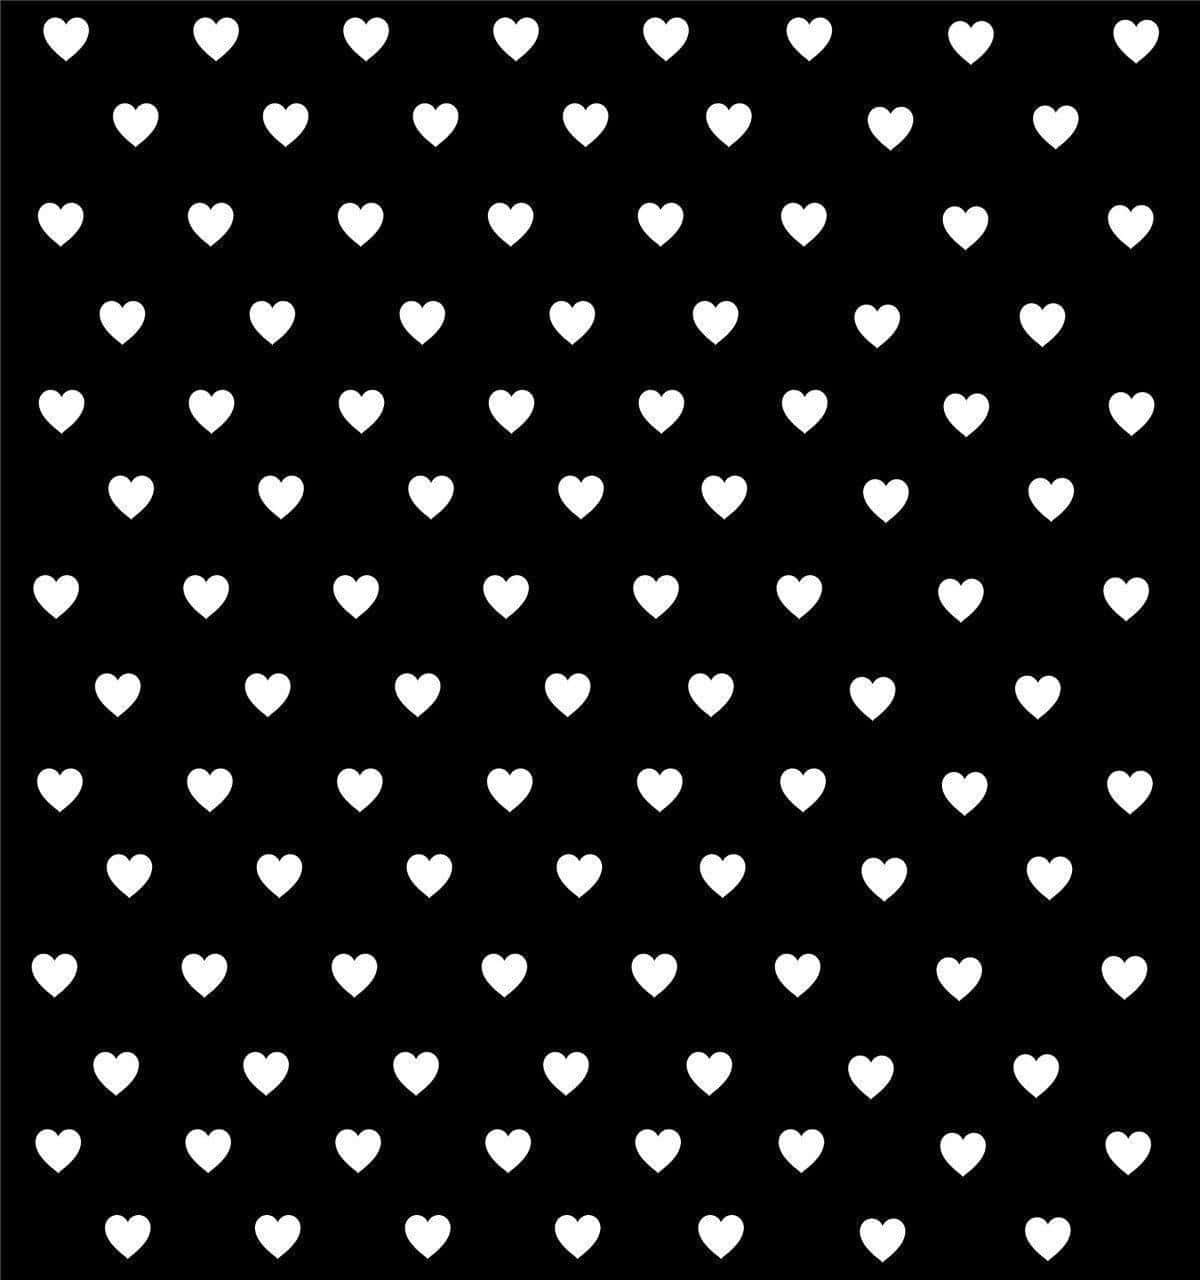 A mesmerizing black and white heart background